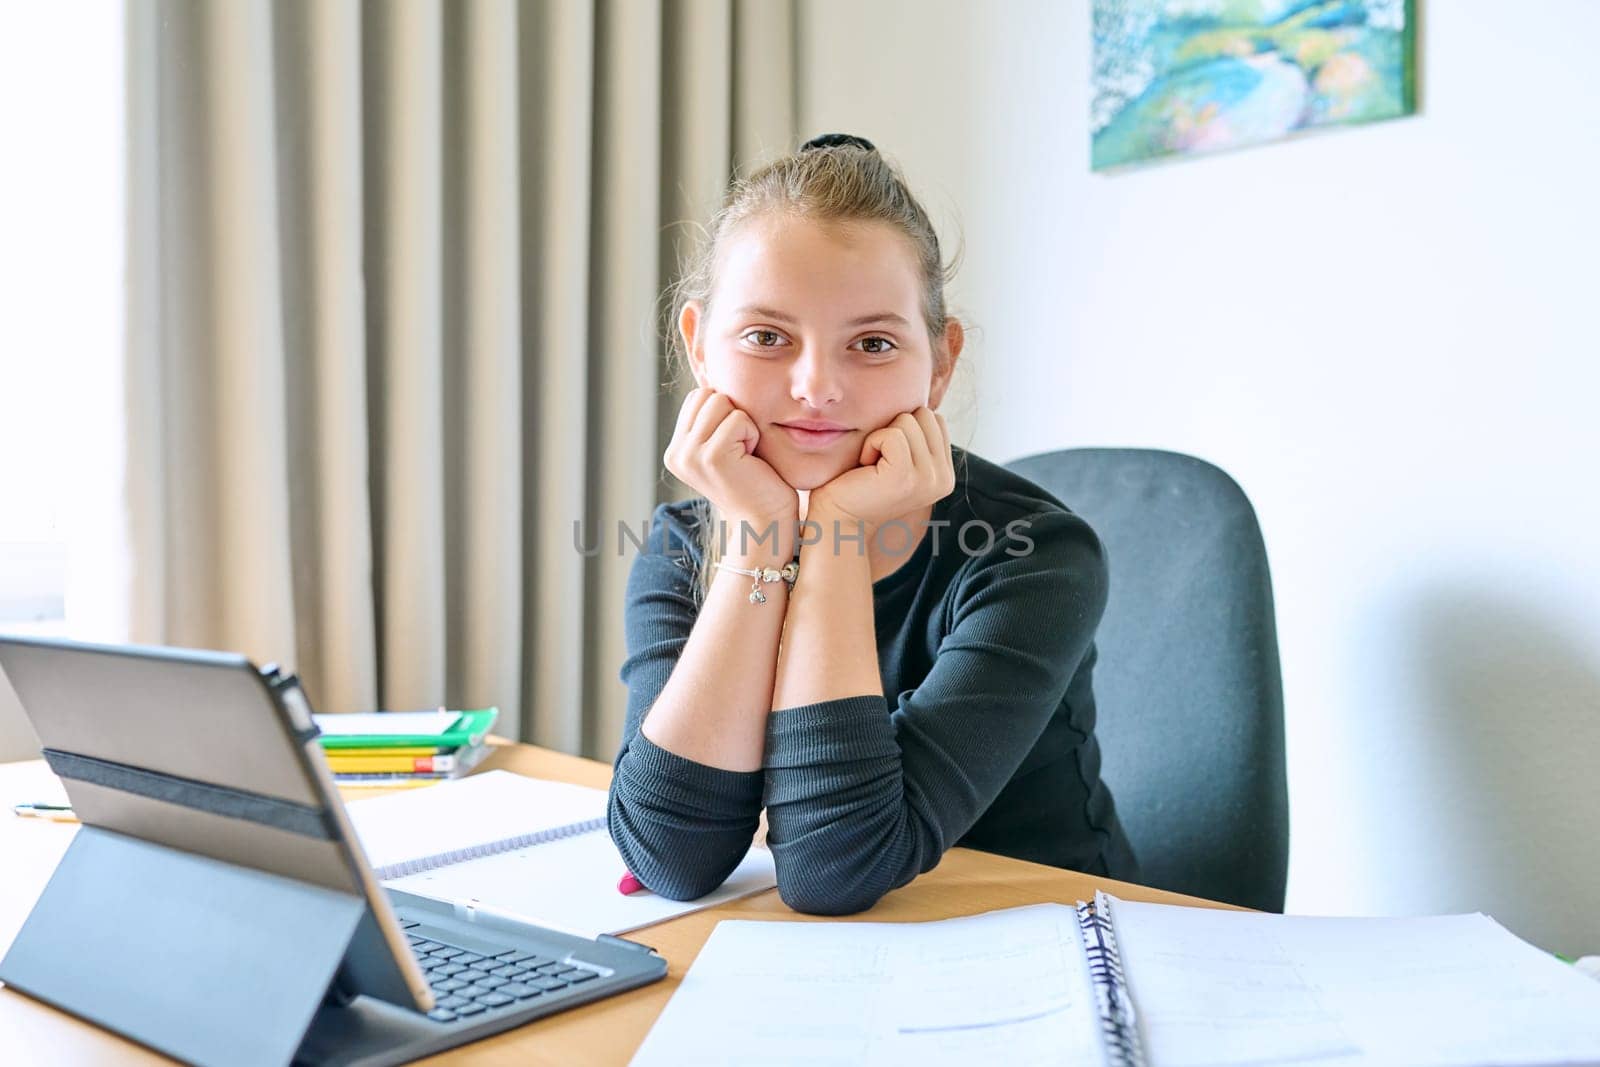 Portrait of smiling child girl sitting at desk at home with digital tablet textbooks, looking at camera. Education, knowledge, school, childhood concept